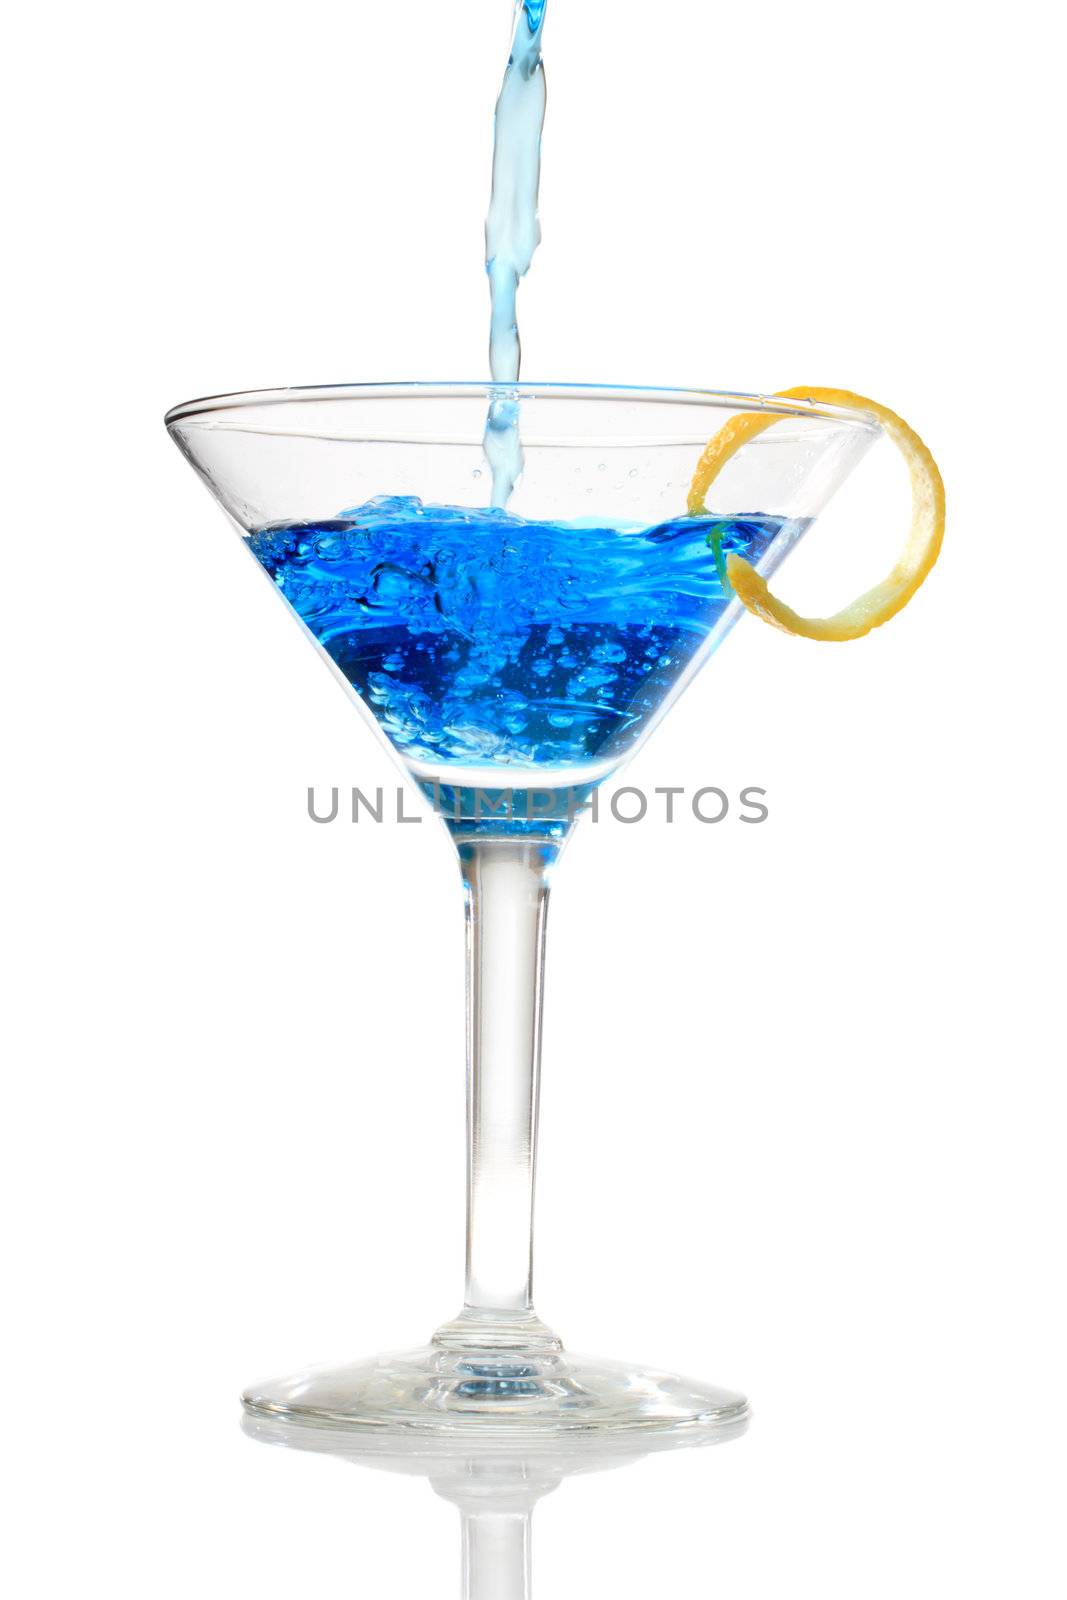  Blue cocktail being poured into a glass on white background